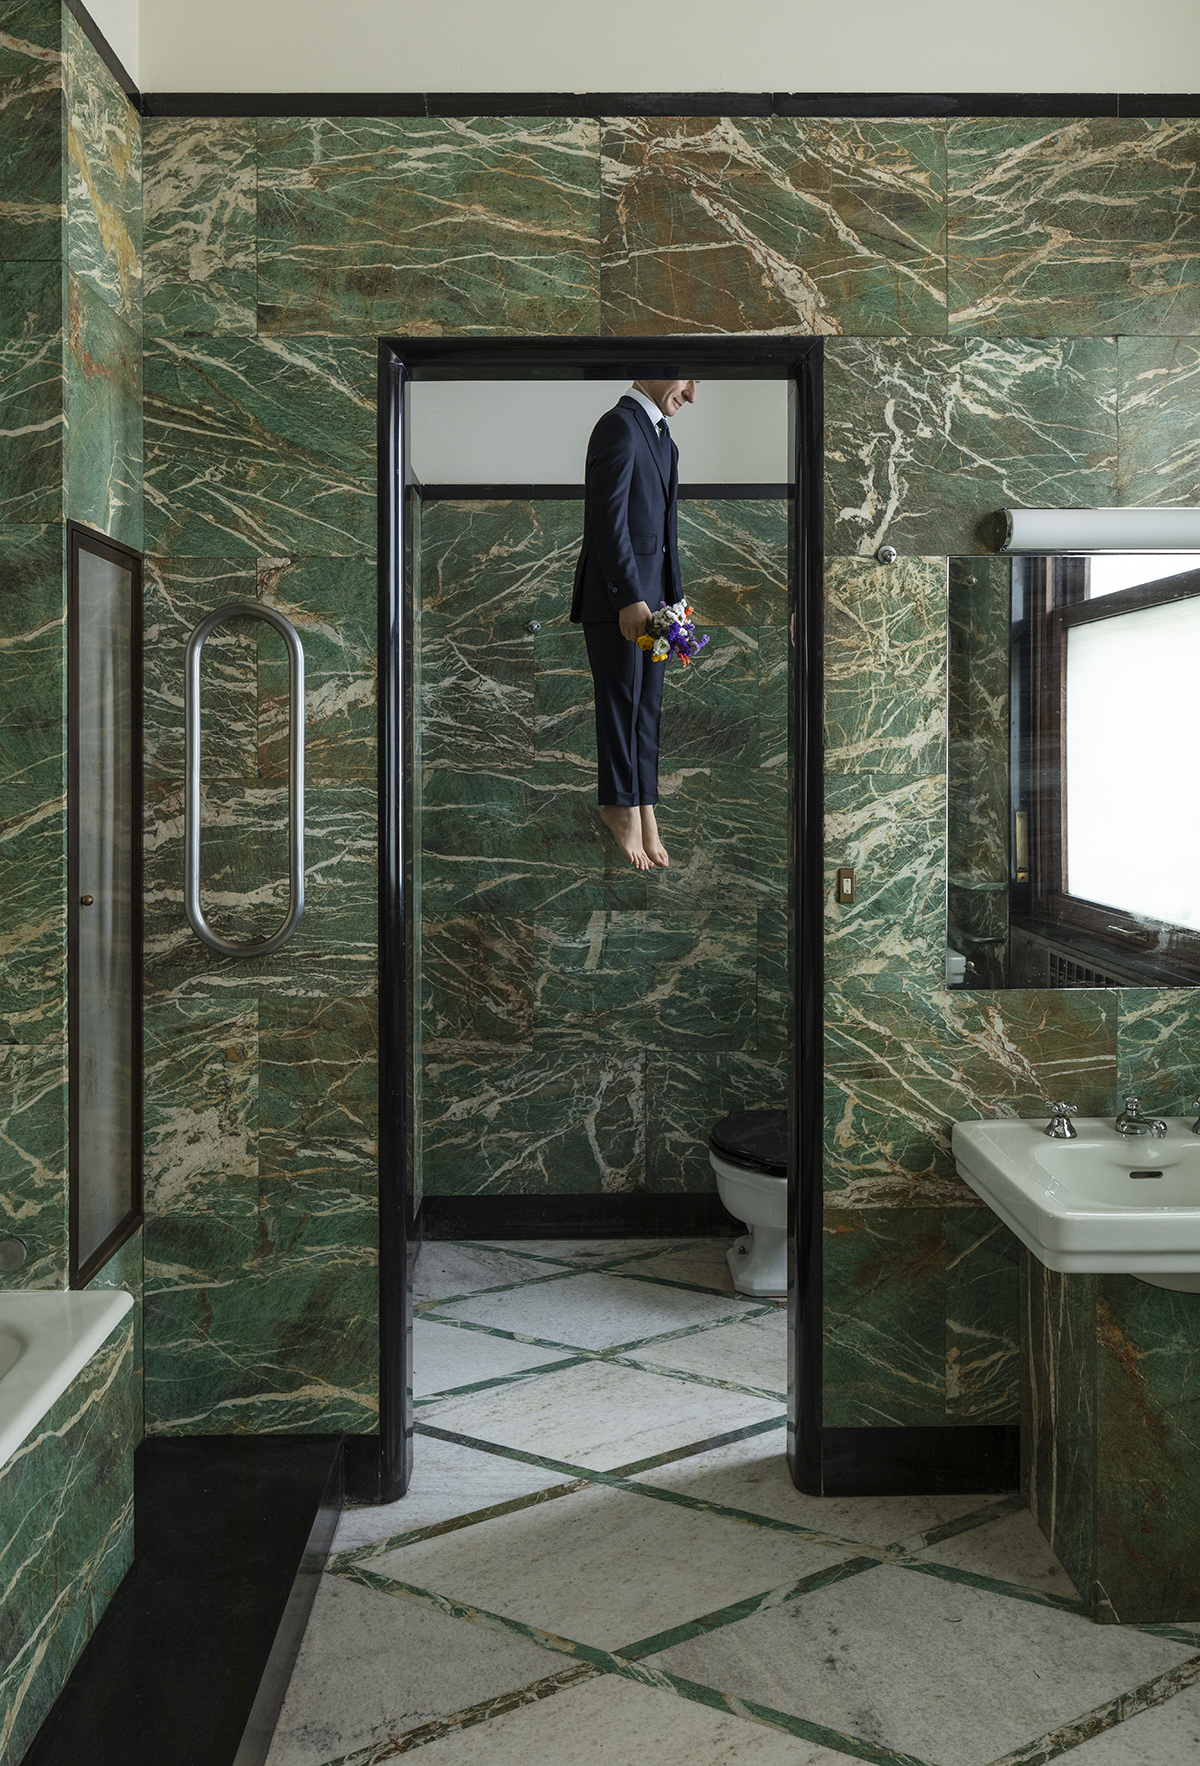 A man hanging from a green bathroom